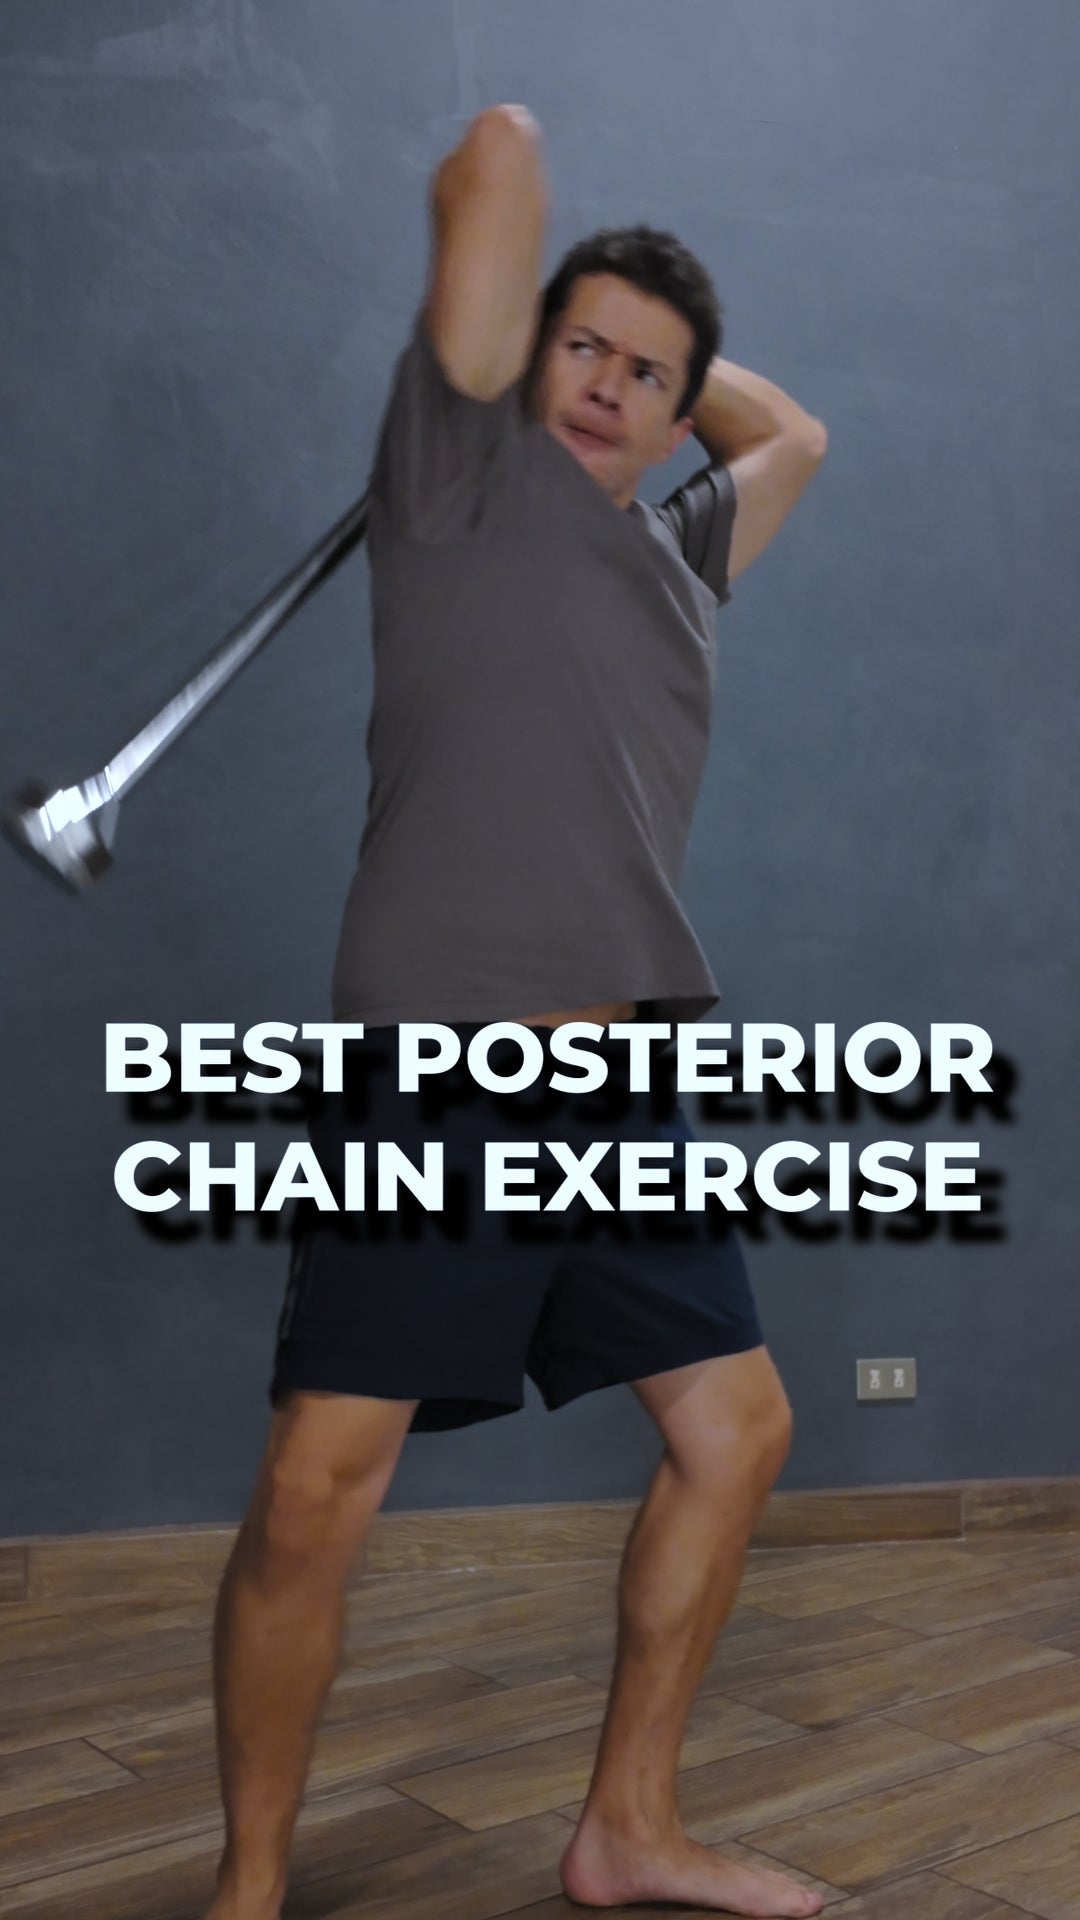 THE BEST POSTERIOR CHAIN EXERCISE